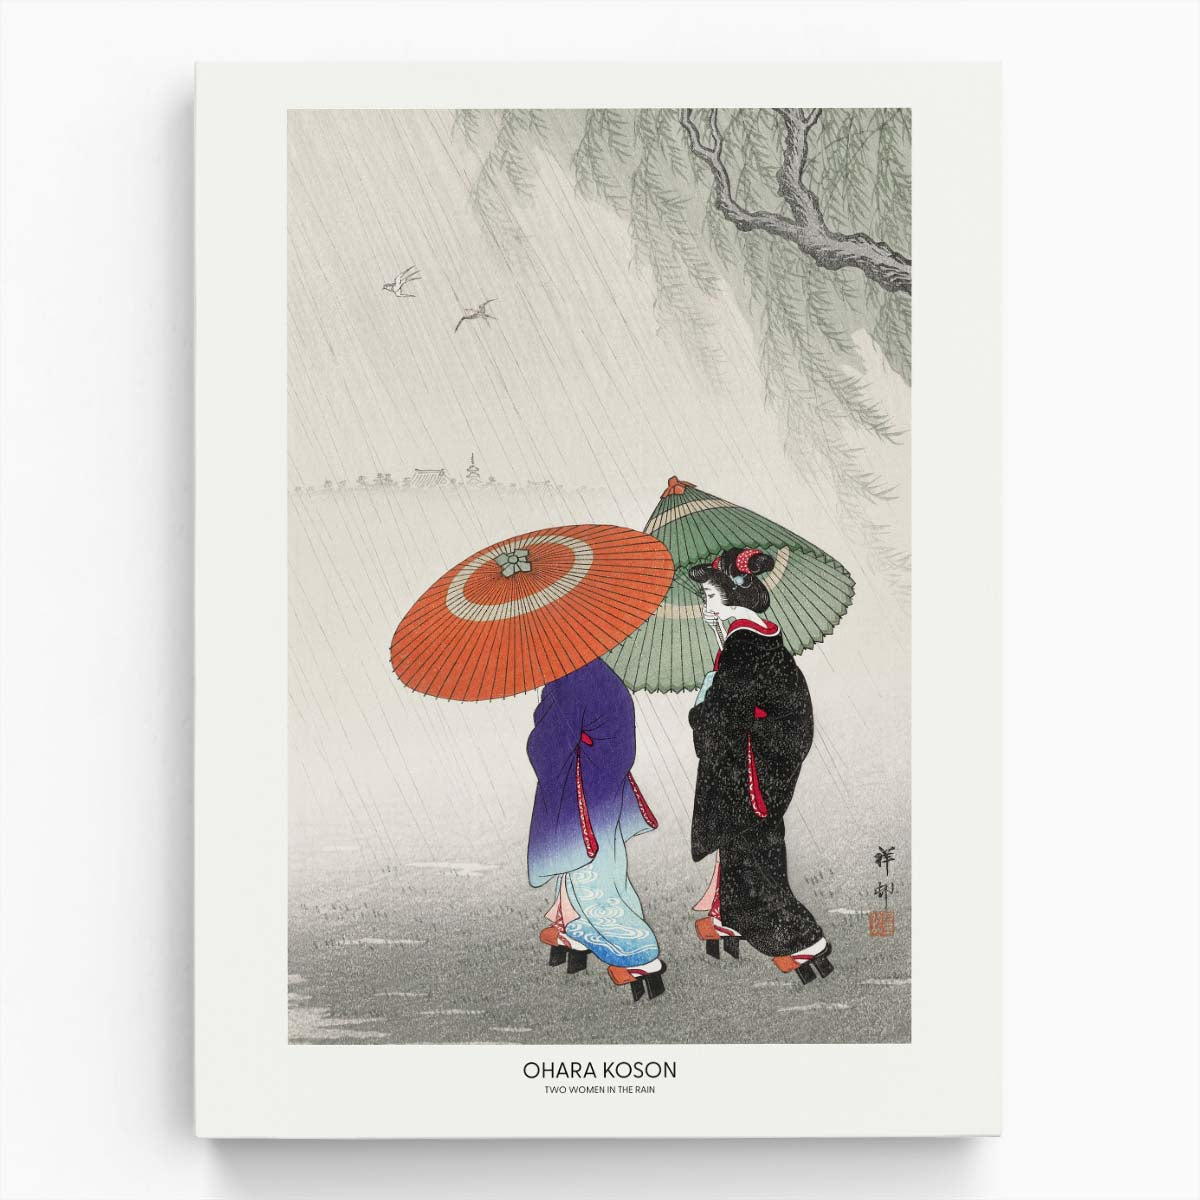 Vintage Japanese Art - Ohara Koson Rainy Duo Illustration by Luxuriance Designs, made in USA